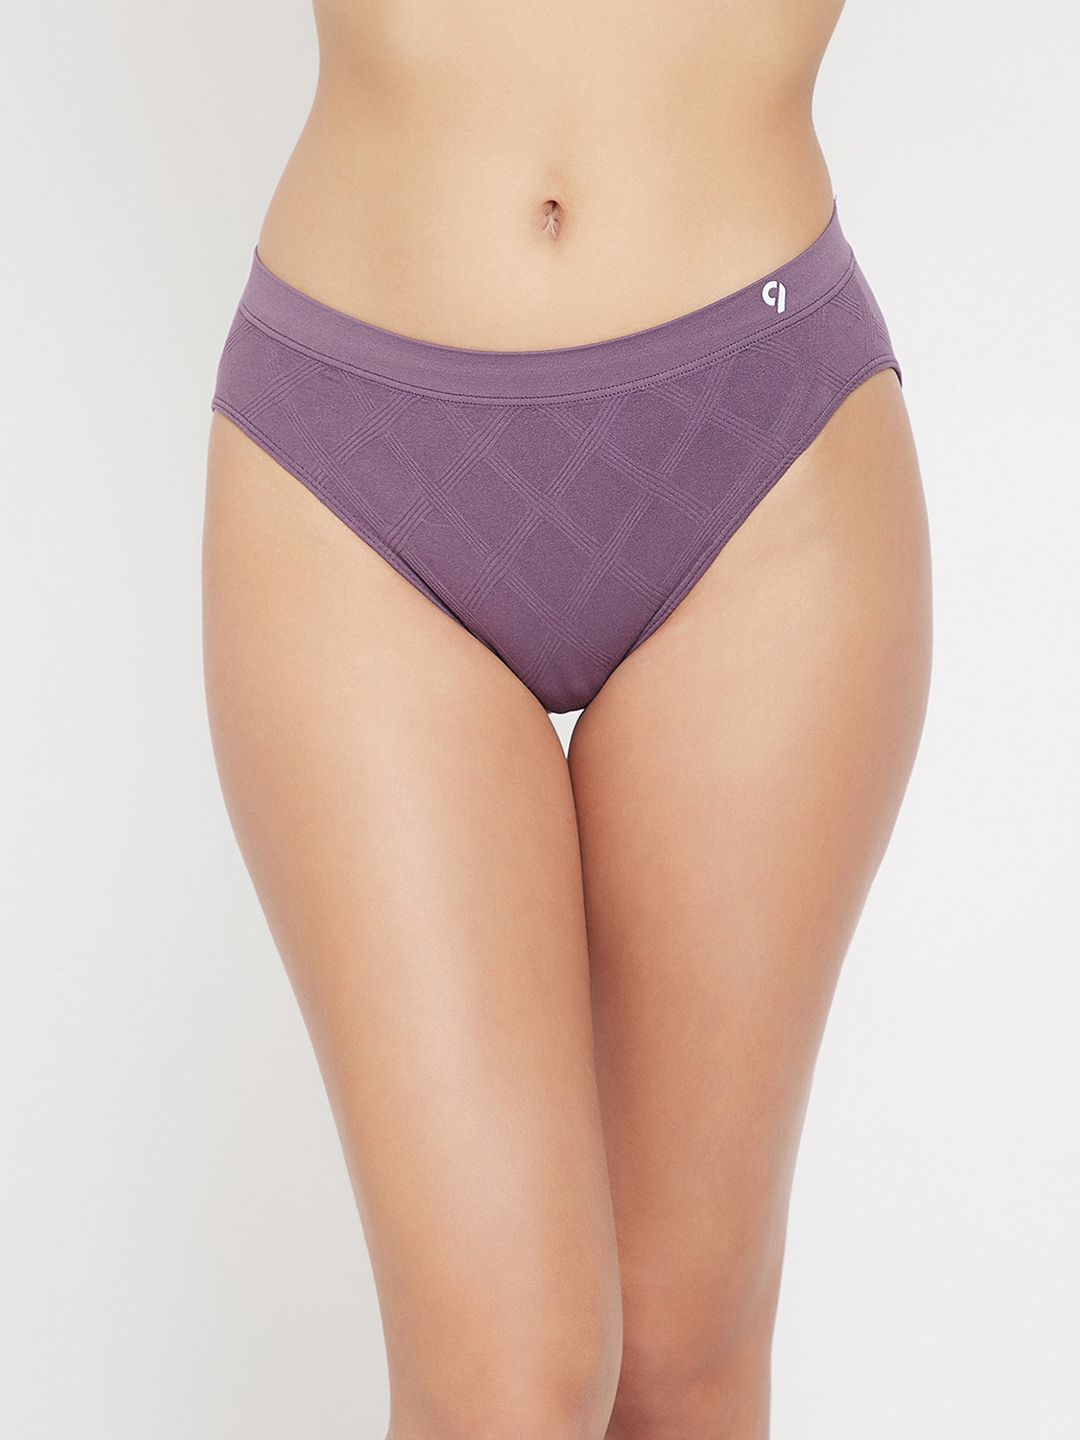 C9 Airwear Women's Assorted Panty pack